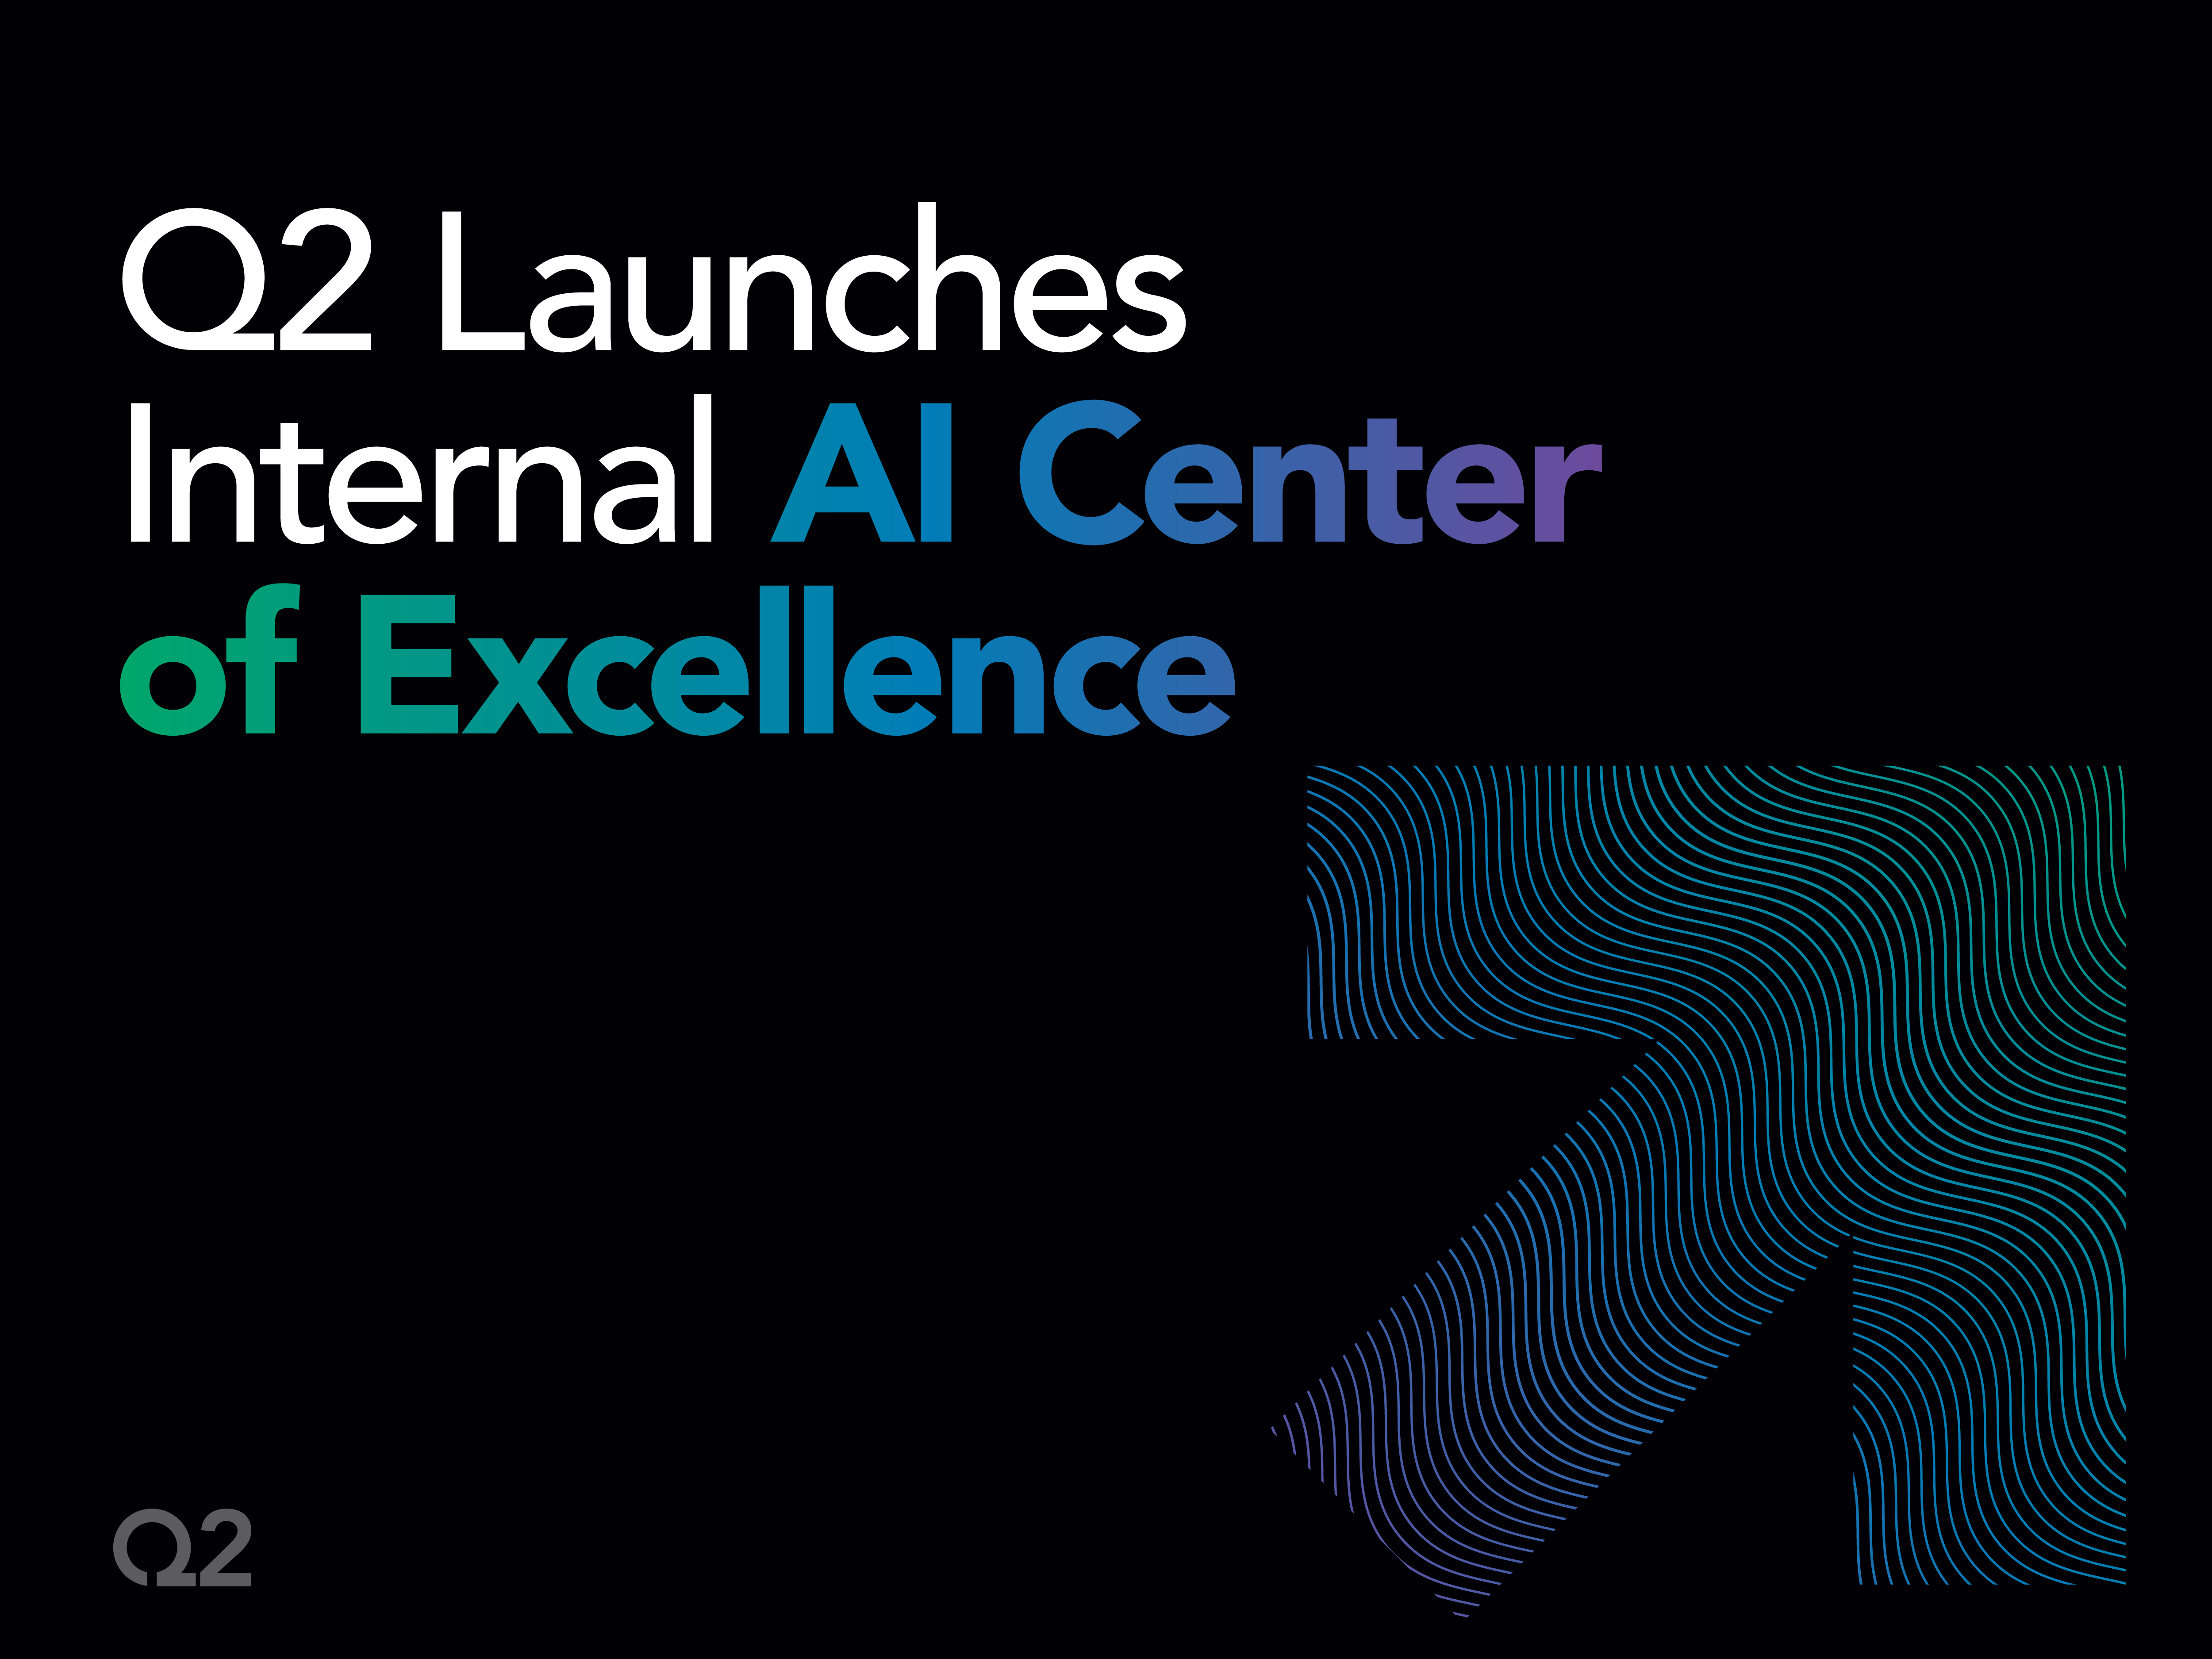 Q2 Launches Internal AI Center of Excellence